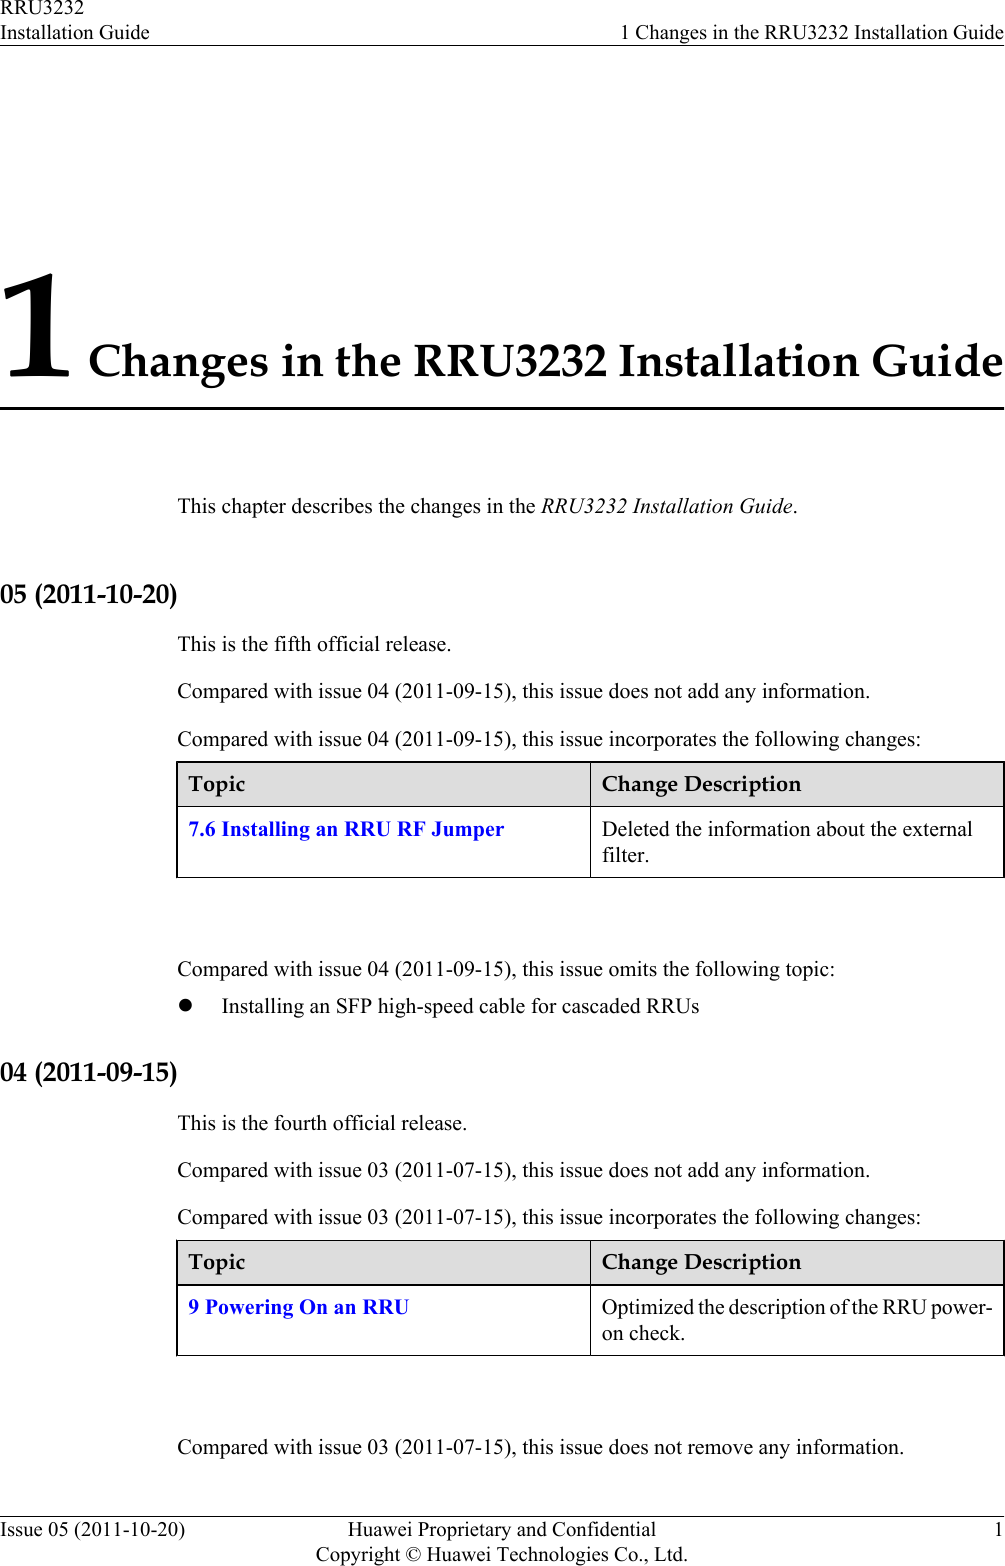 1 Changes in the RRU3232 Installation GuideThis chapter describes the changes in the RRU3232 Installation Guide.05 (2011-10-20)This is the fifth official release.Compared with issue 04 (2011-09-15), this issue does not add any information.Compared with issue 04 (2011-09-15), this issue incorporates the following changes:Topic Change Description7.6 Installing an RRU RF Jumper Deleted the information about the externalfilter. Compared with issue 04 (2011-09-15), this issue omits the following topic:lInstalling an SFP high-speed cable for cascaded RRUs04 (2011-09-15)This is the fourth official release.Compared with issue 03 (2011-07-15), this issue does not add any information.Compared with issue 03 (2011-07-15), this issue incorporates the following changes:Topic Change Description9 Powering On an RRU Optimized the description of the RRU power-on check. Compared with issue 03 (2011-07-15), this issue does not remove any information.RRU3232Installation Guide 1 Changes in the RRU3232 Installation GuideIssue 05 (2011-10-20) Huawei Proprietary and ConfidentialCopyright © Huawei Technologies Co., Ltd.1